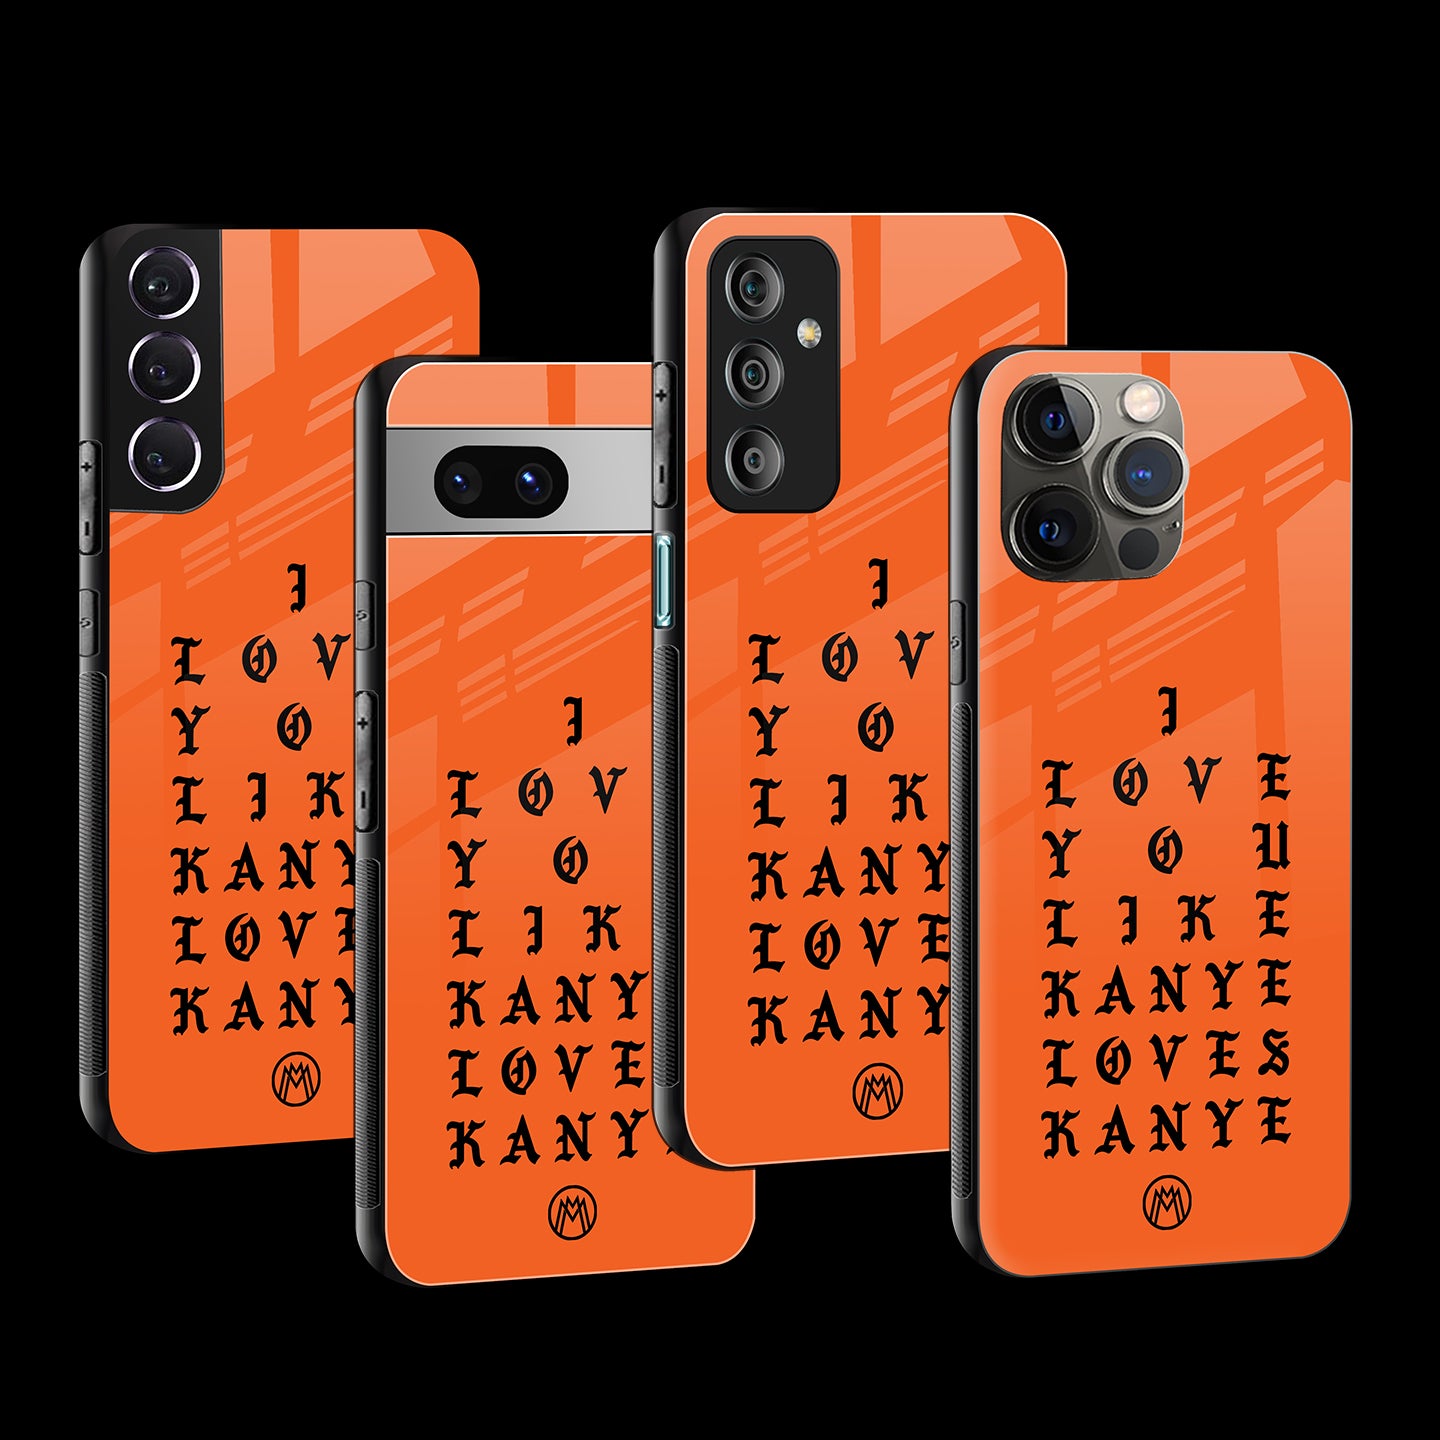 back phone covers for apple iphone, samsung galaxy, google pixel, oneplus, redmi, vivo, oppo, realme